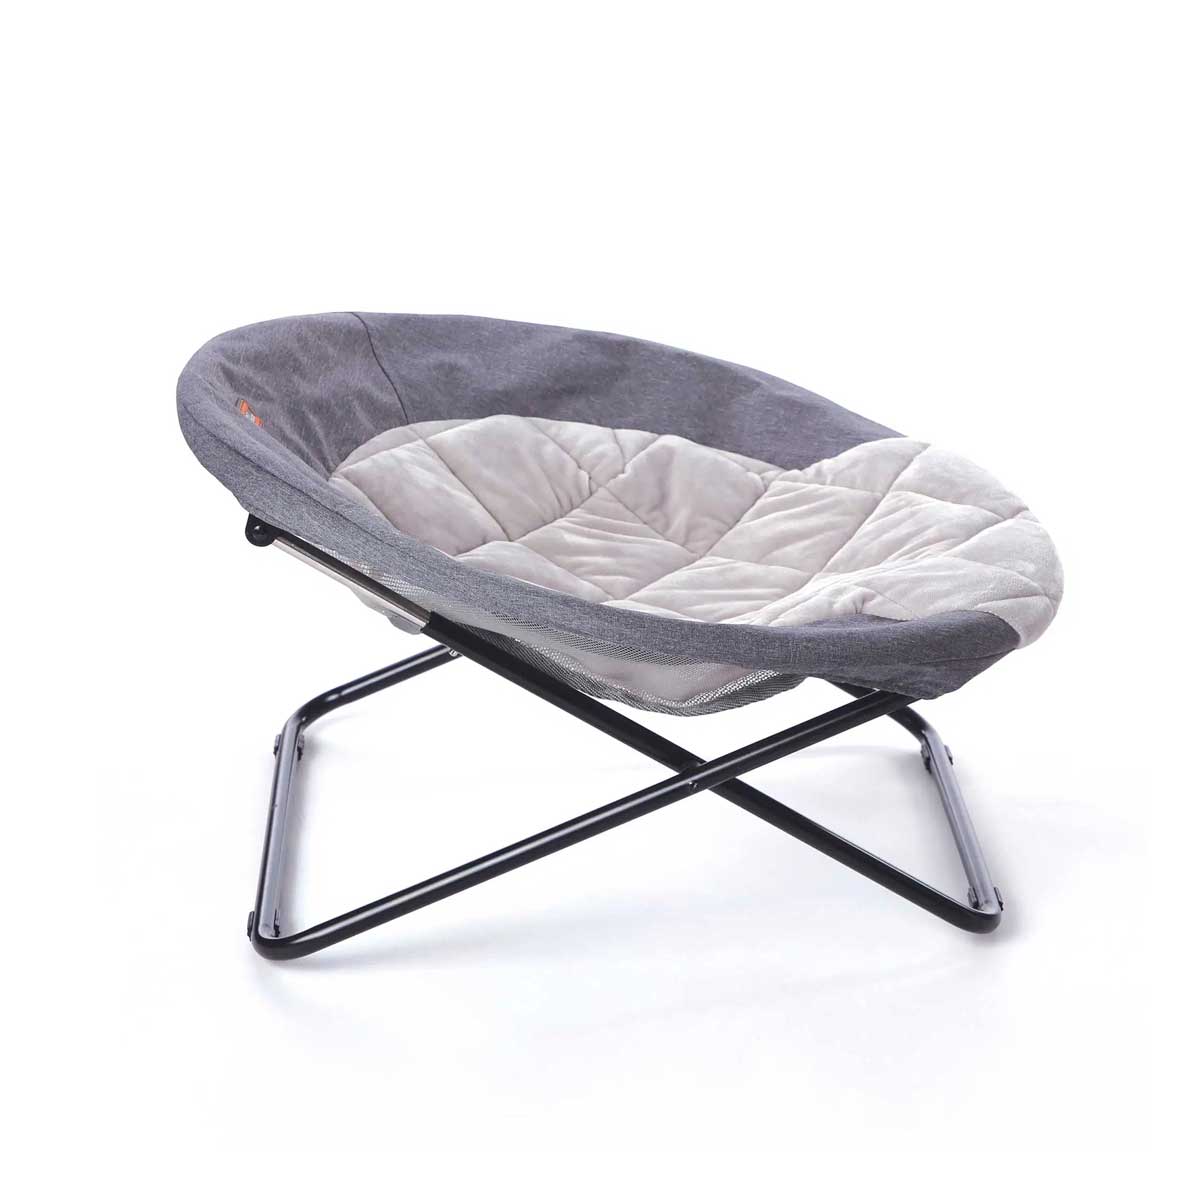 Cozy Cot in Gray | Pawlicious & Company